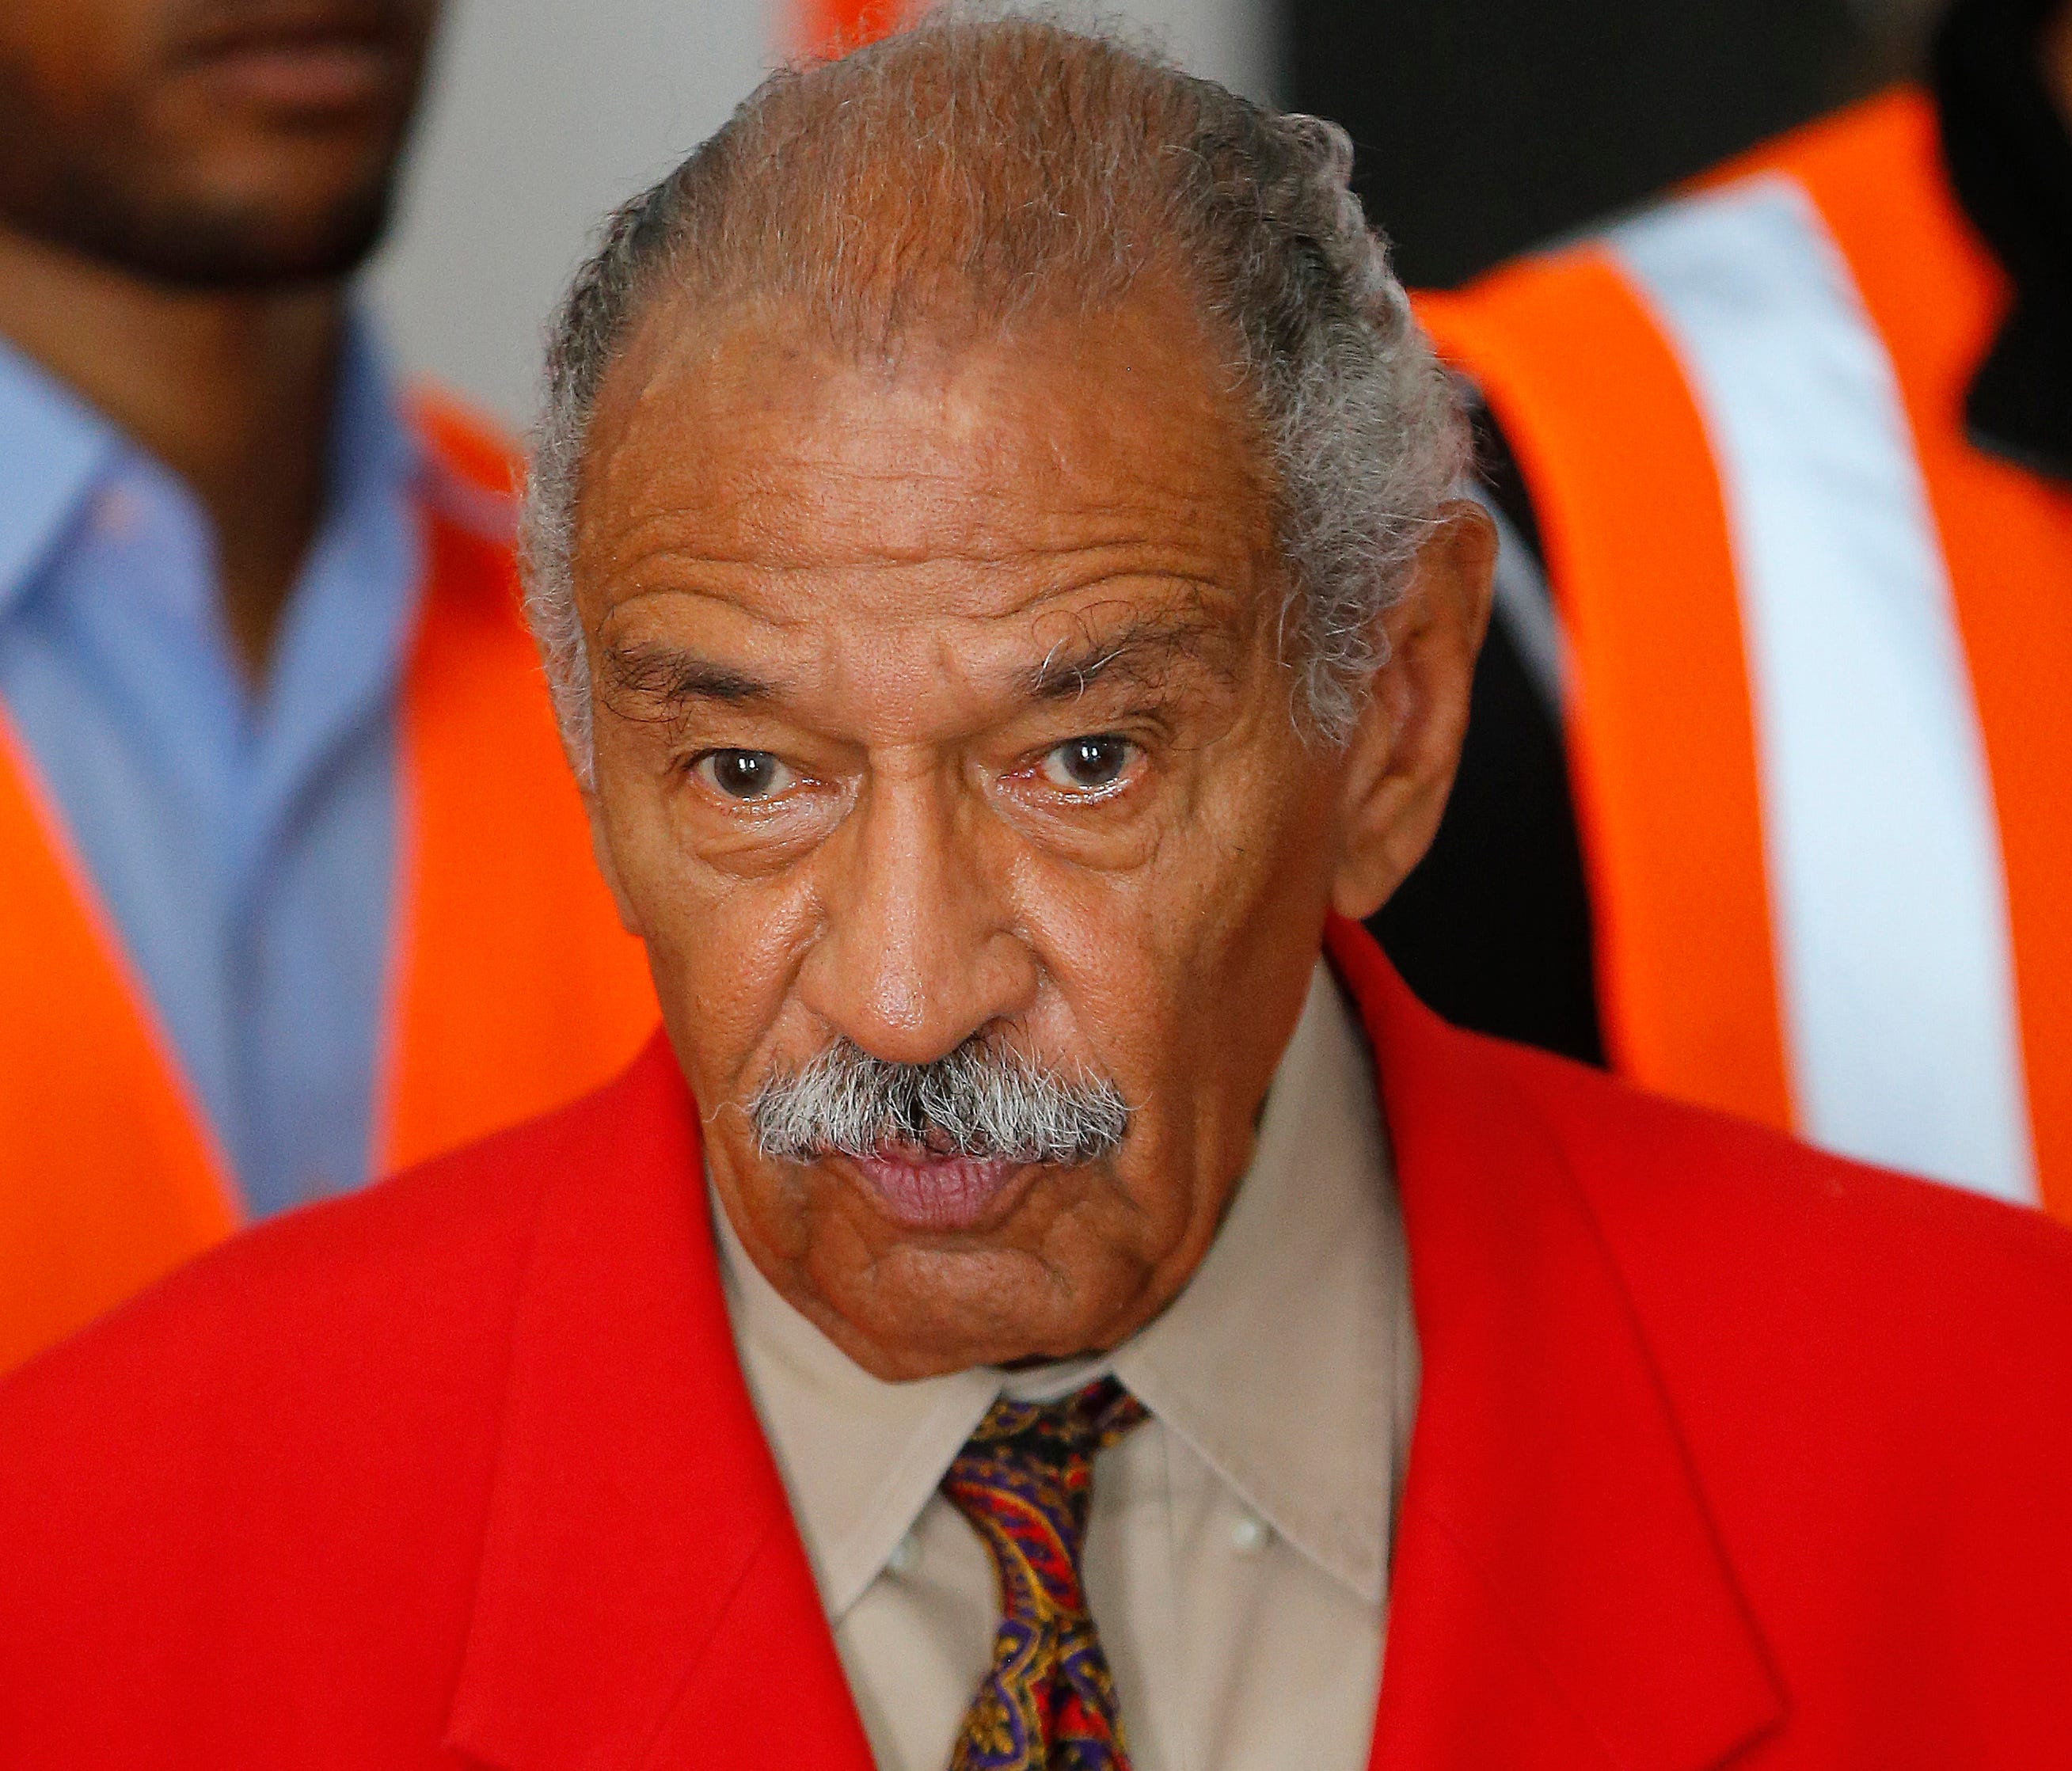 In this July 7, 2014 file photo, U.S. Rep. John Conyers, D-Mich., speaks in Detroit.